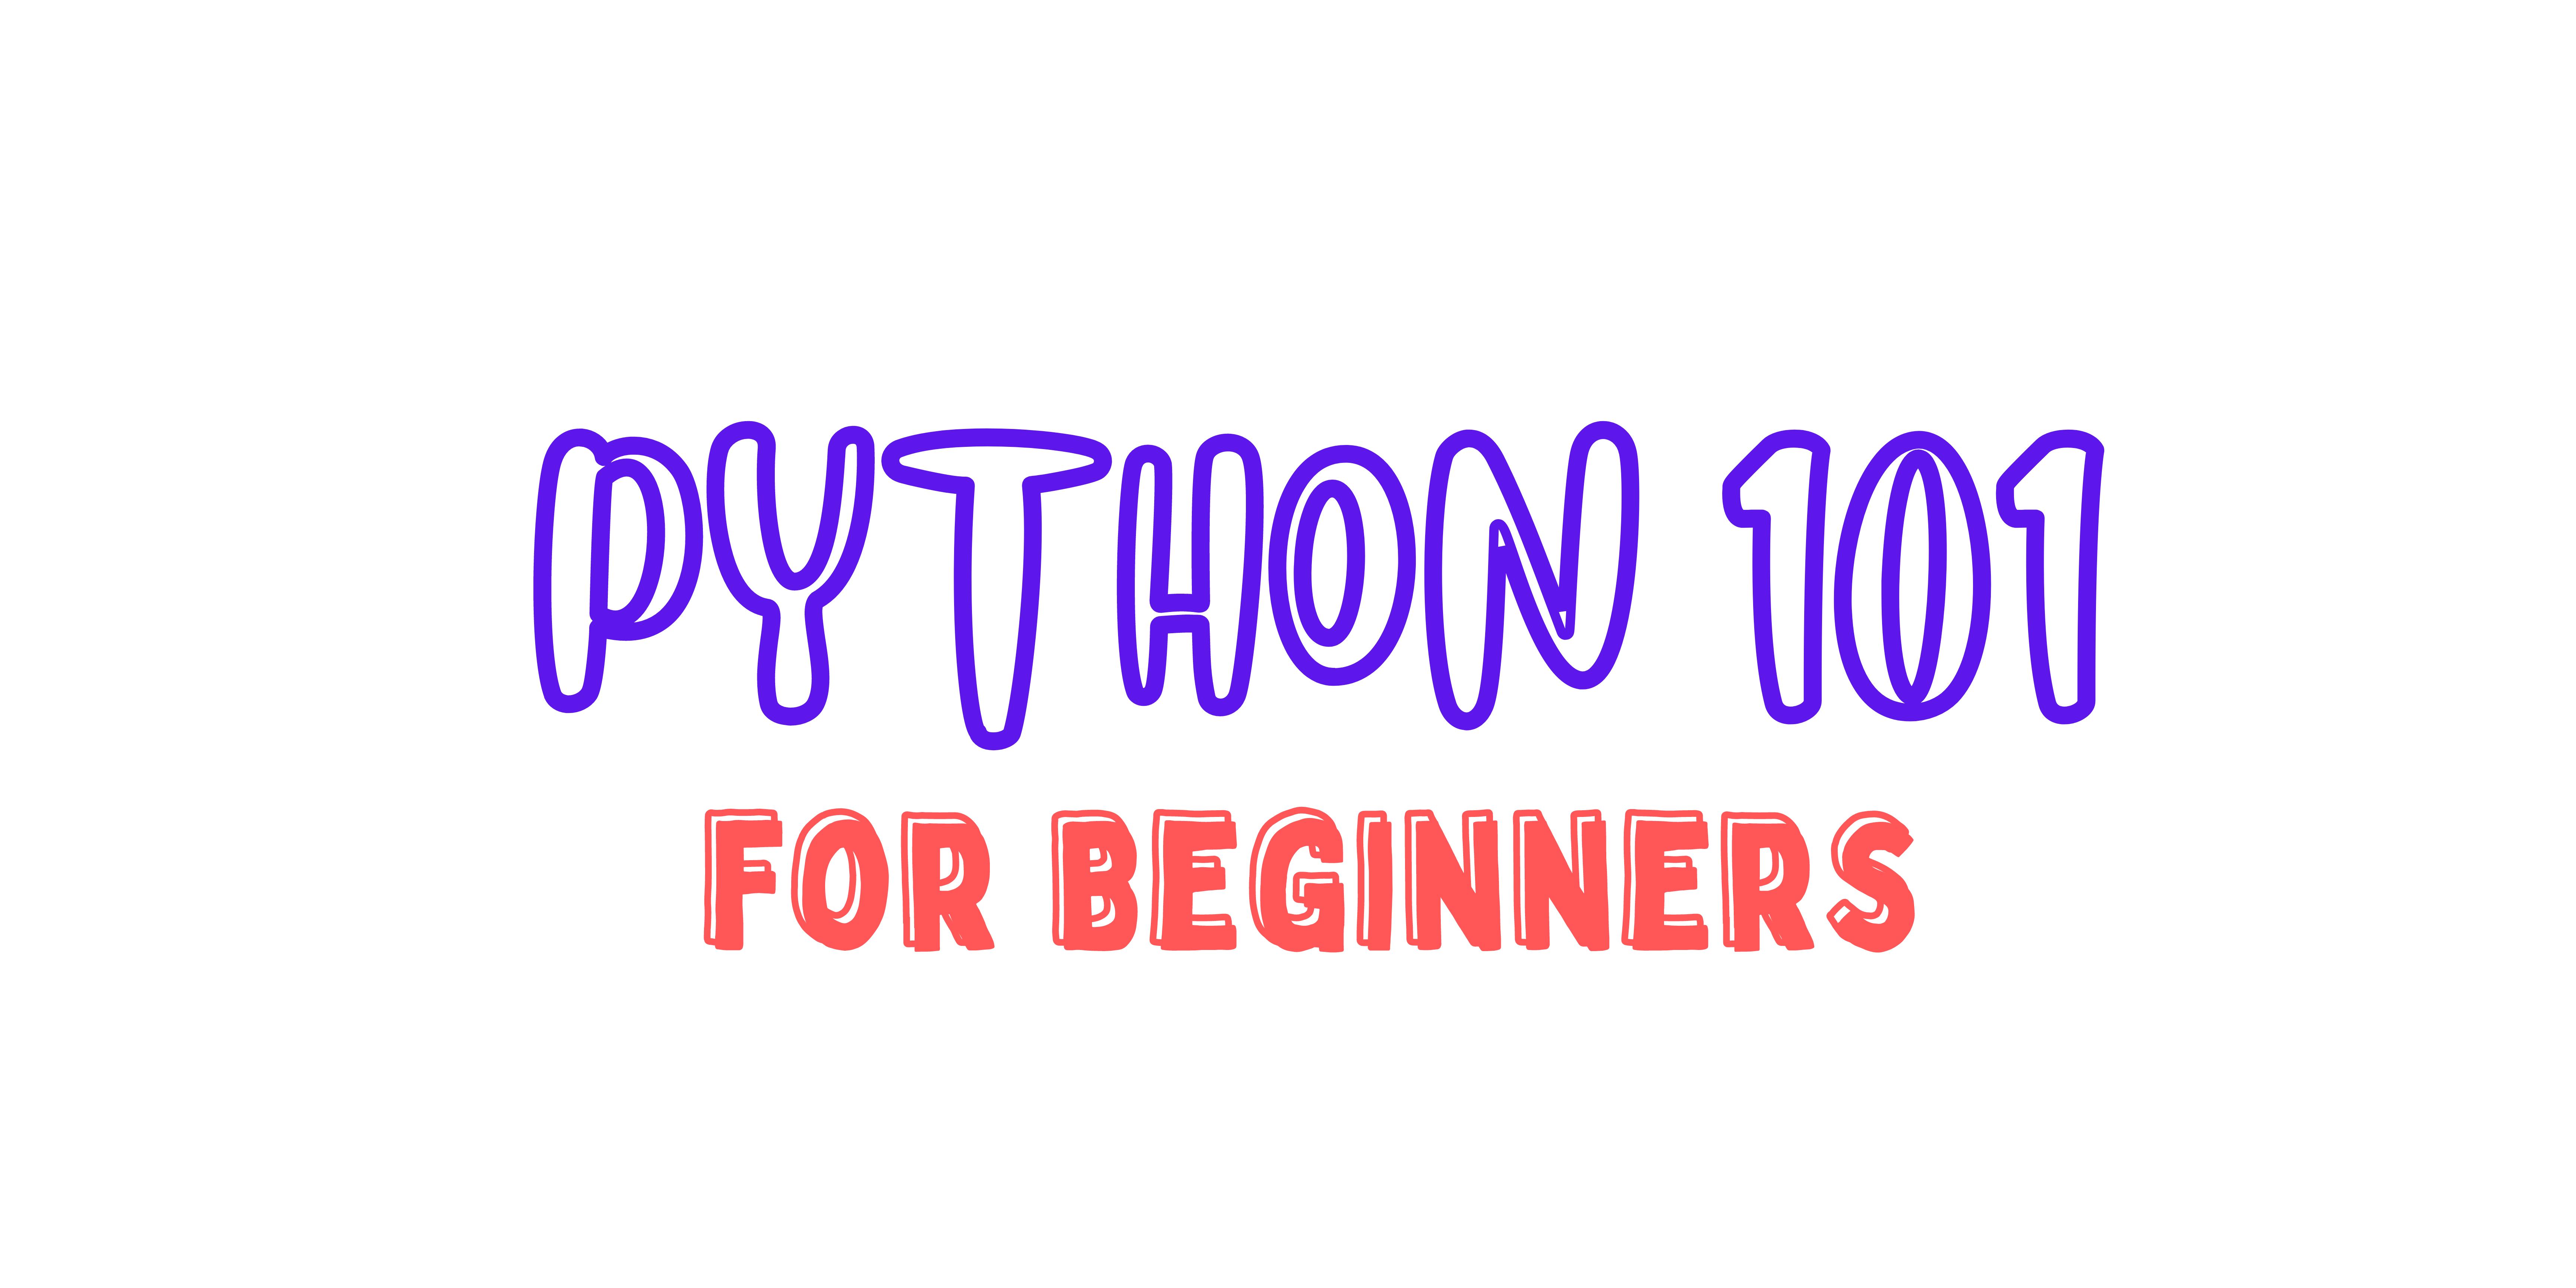 image containing text python 101 for beginners